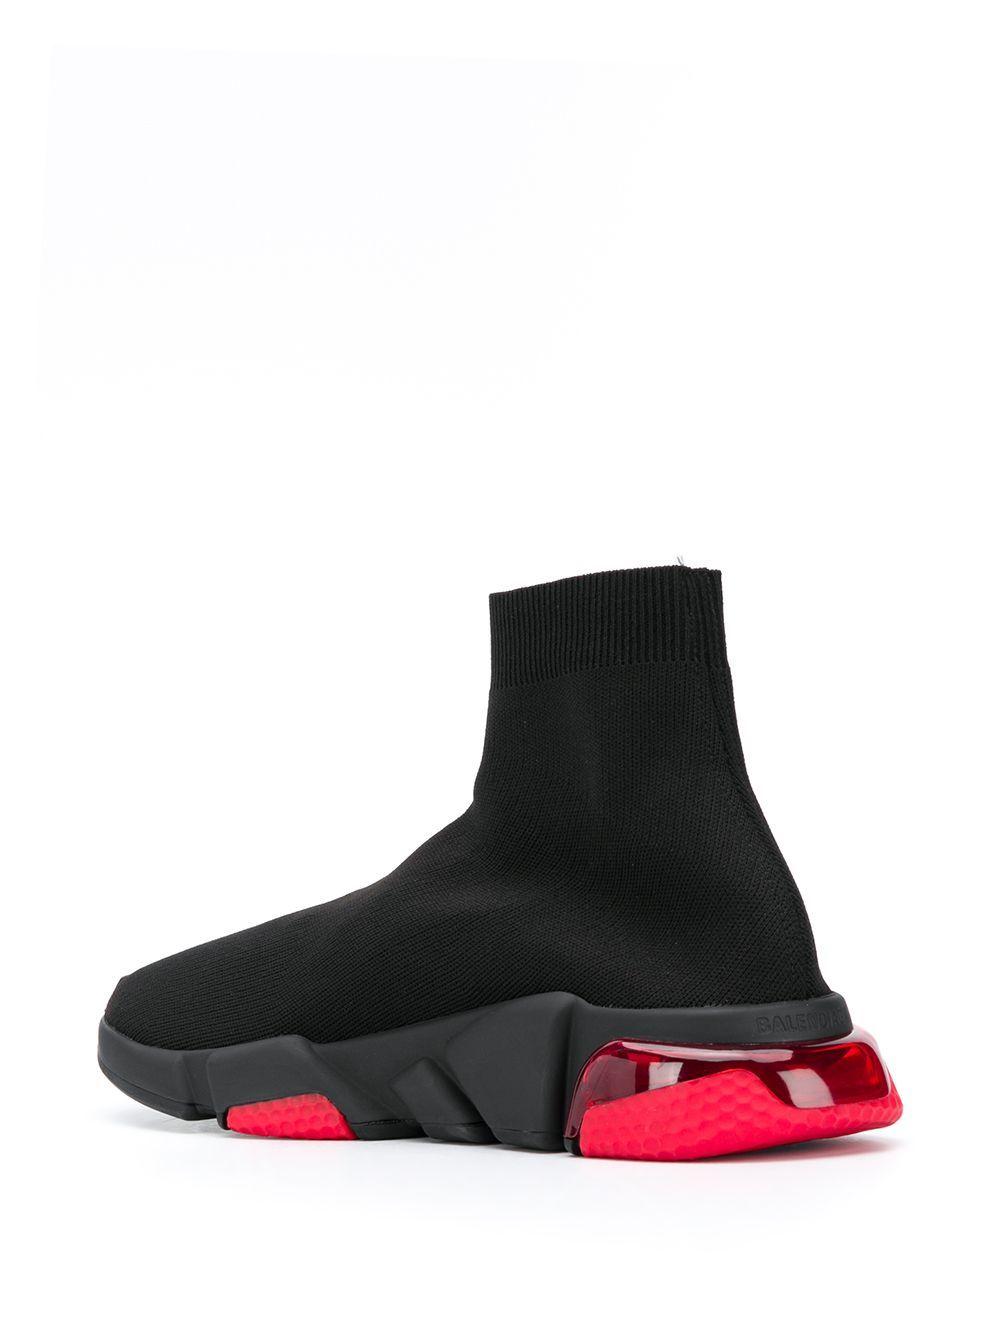 Balenciaga Synthetic Speed Lt Clear Sneaker Black/red for Men - Save 18% |  Lyst